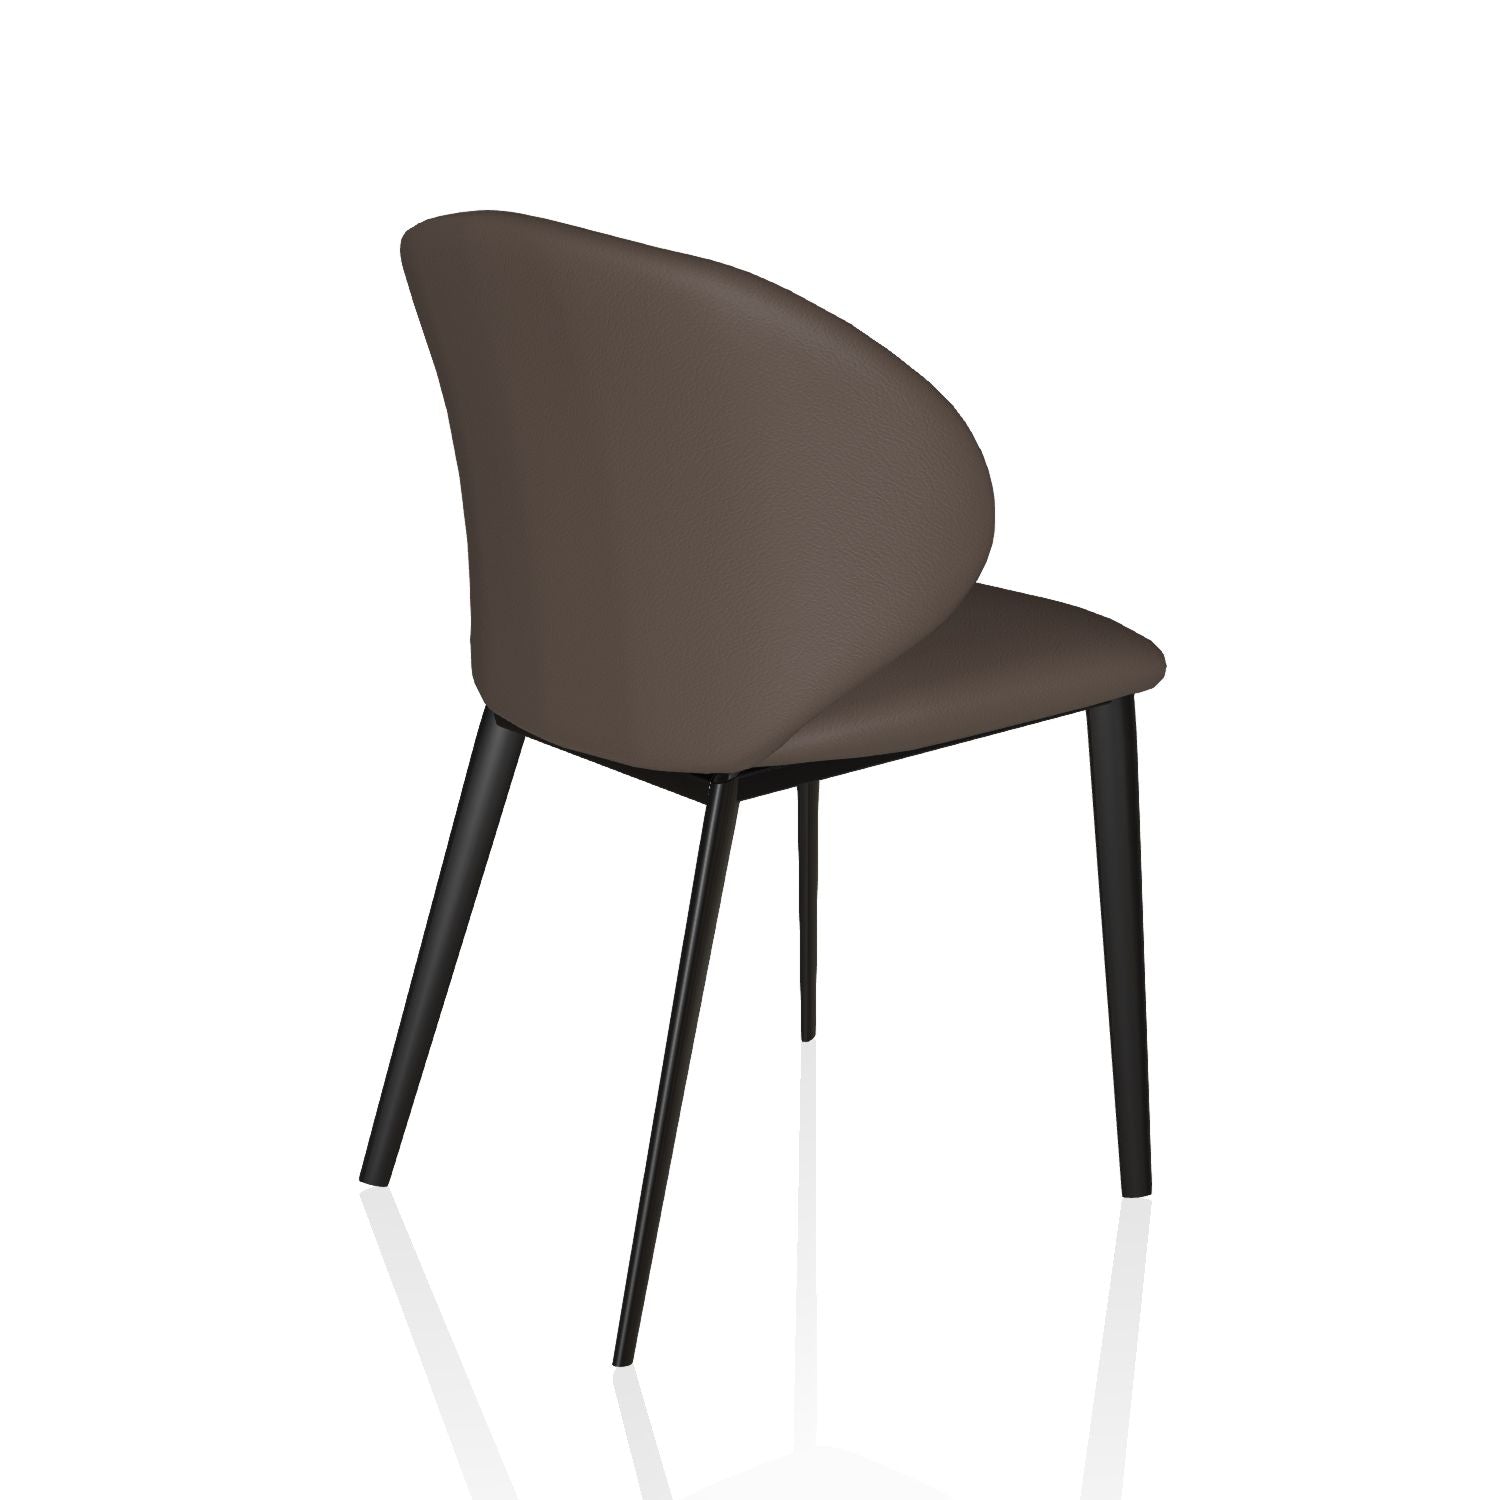 Drop Chair By Bontempi Casa - Nappa Leather Mud